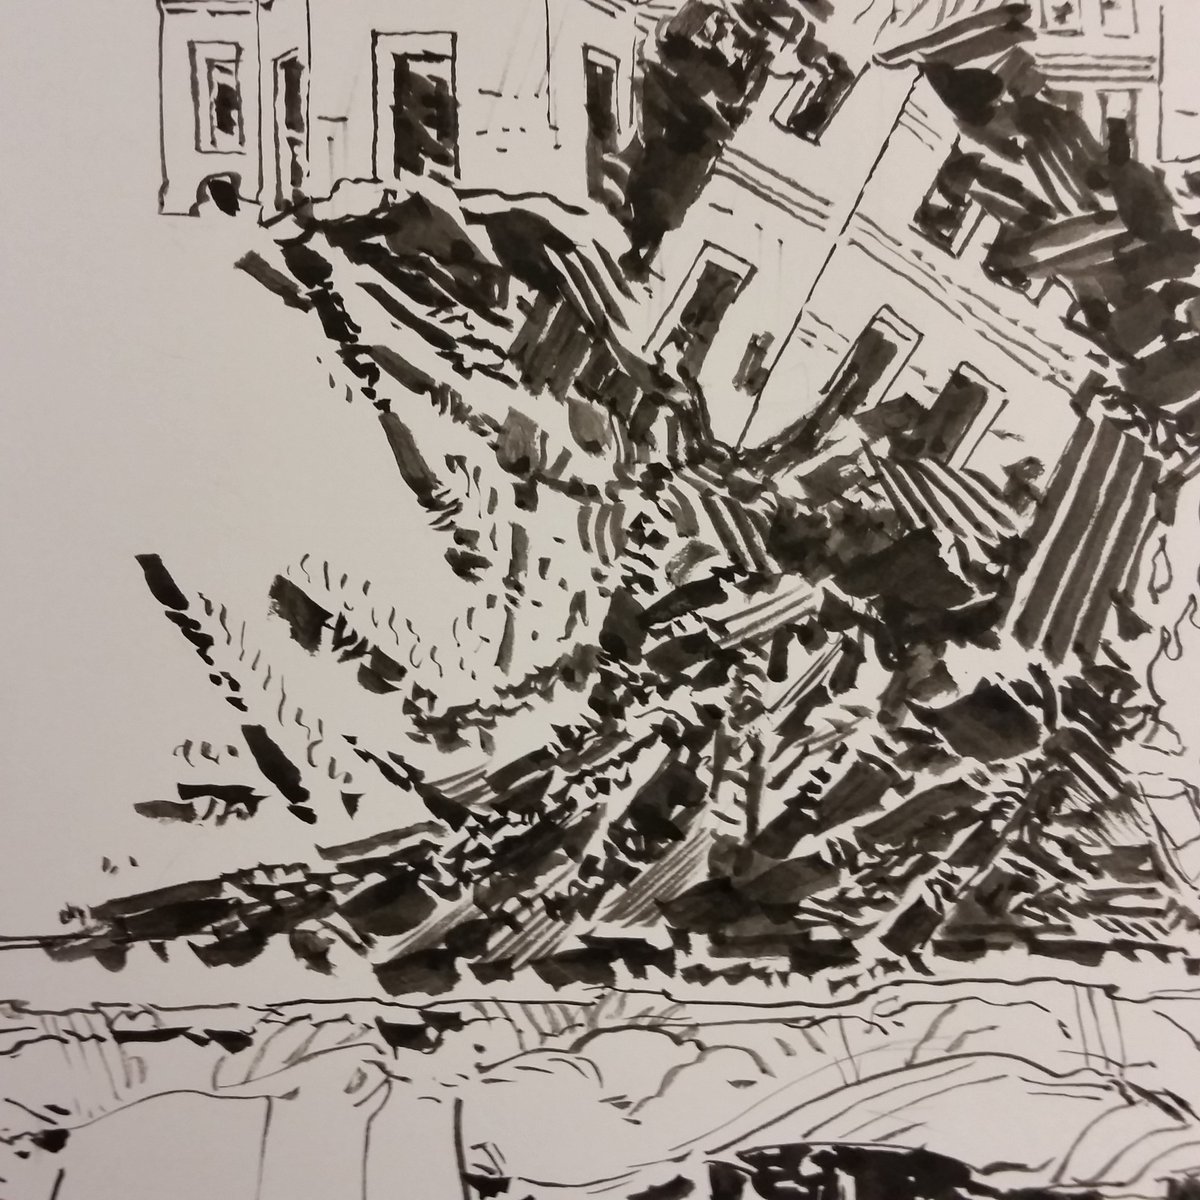 Some details from the final cover of The Unsound I just inked. 